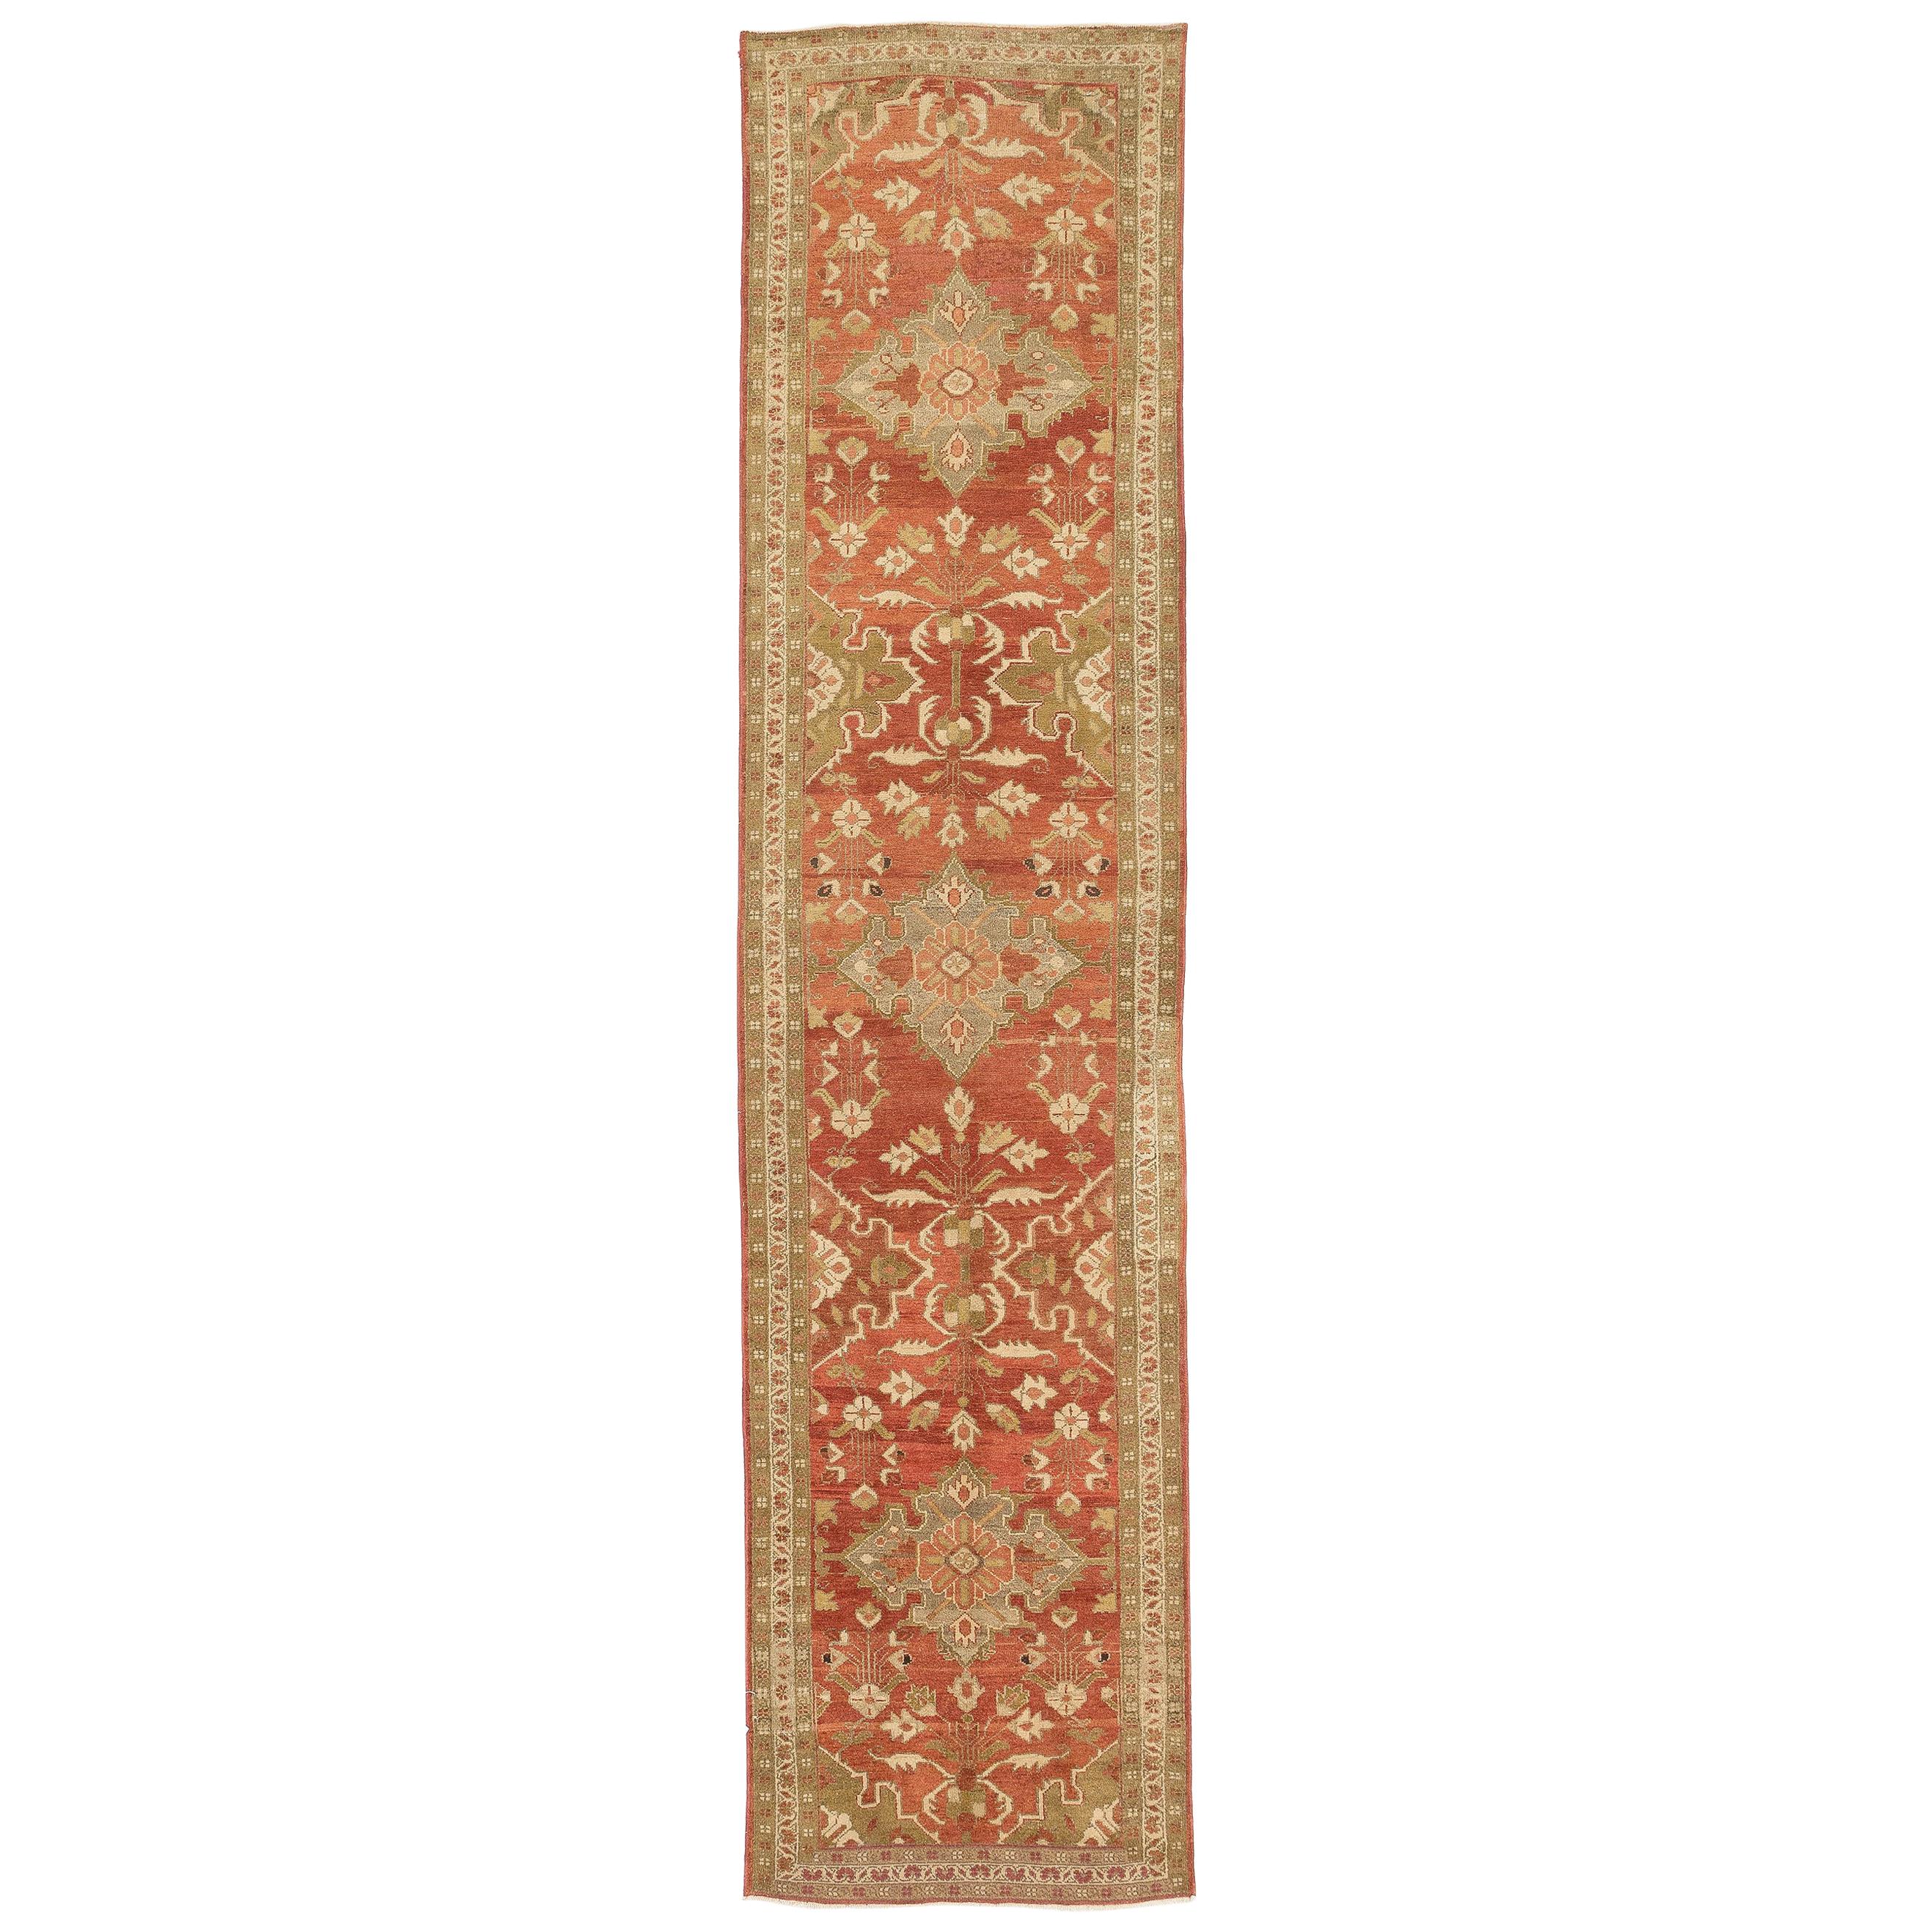 Antique Persian Malayer Runner Rug with Ivory and Green Floral Patterns